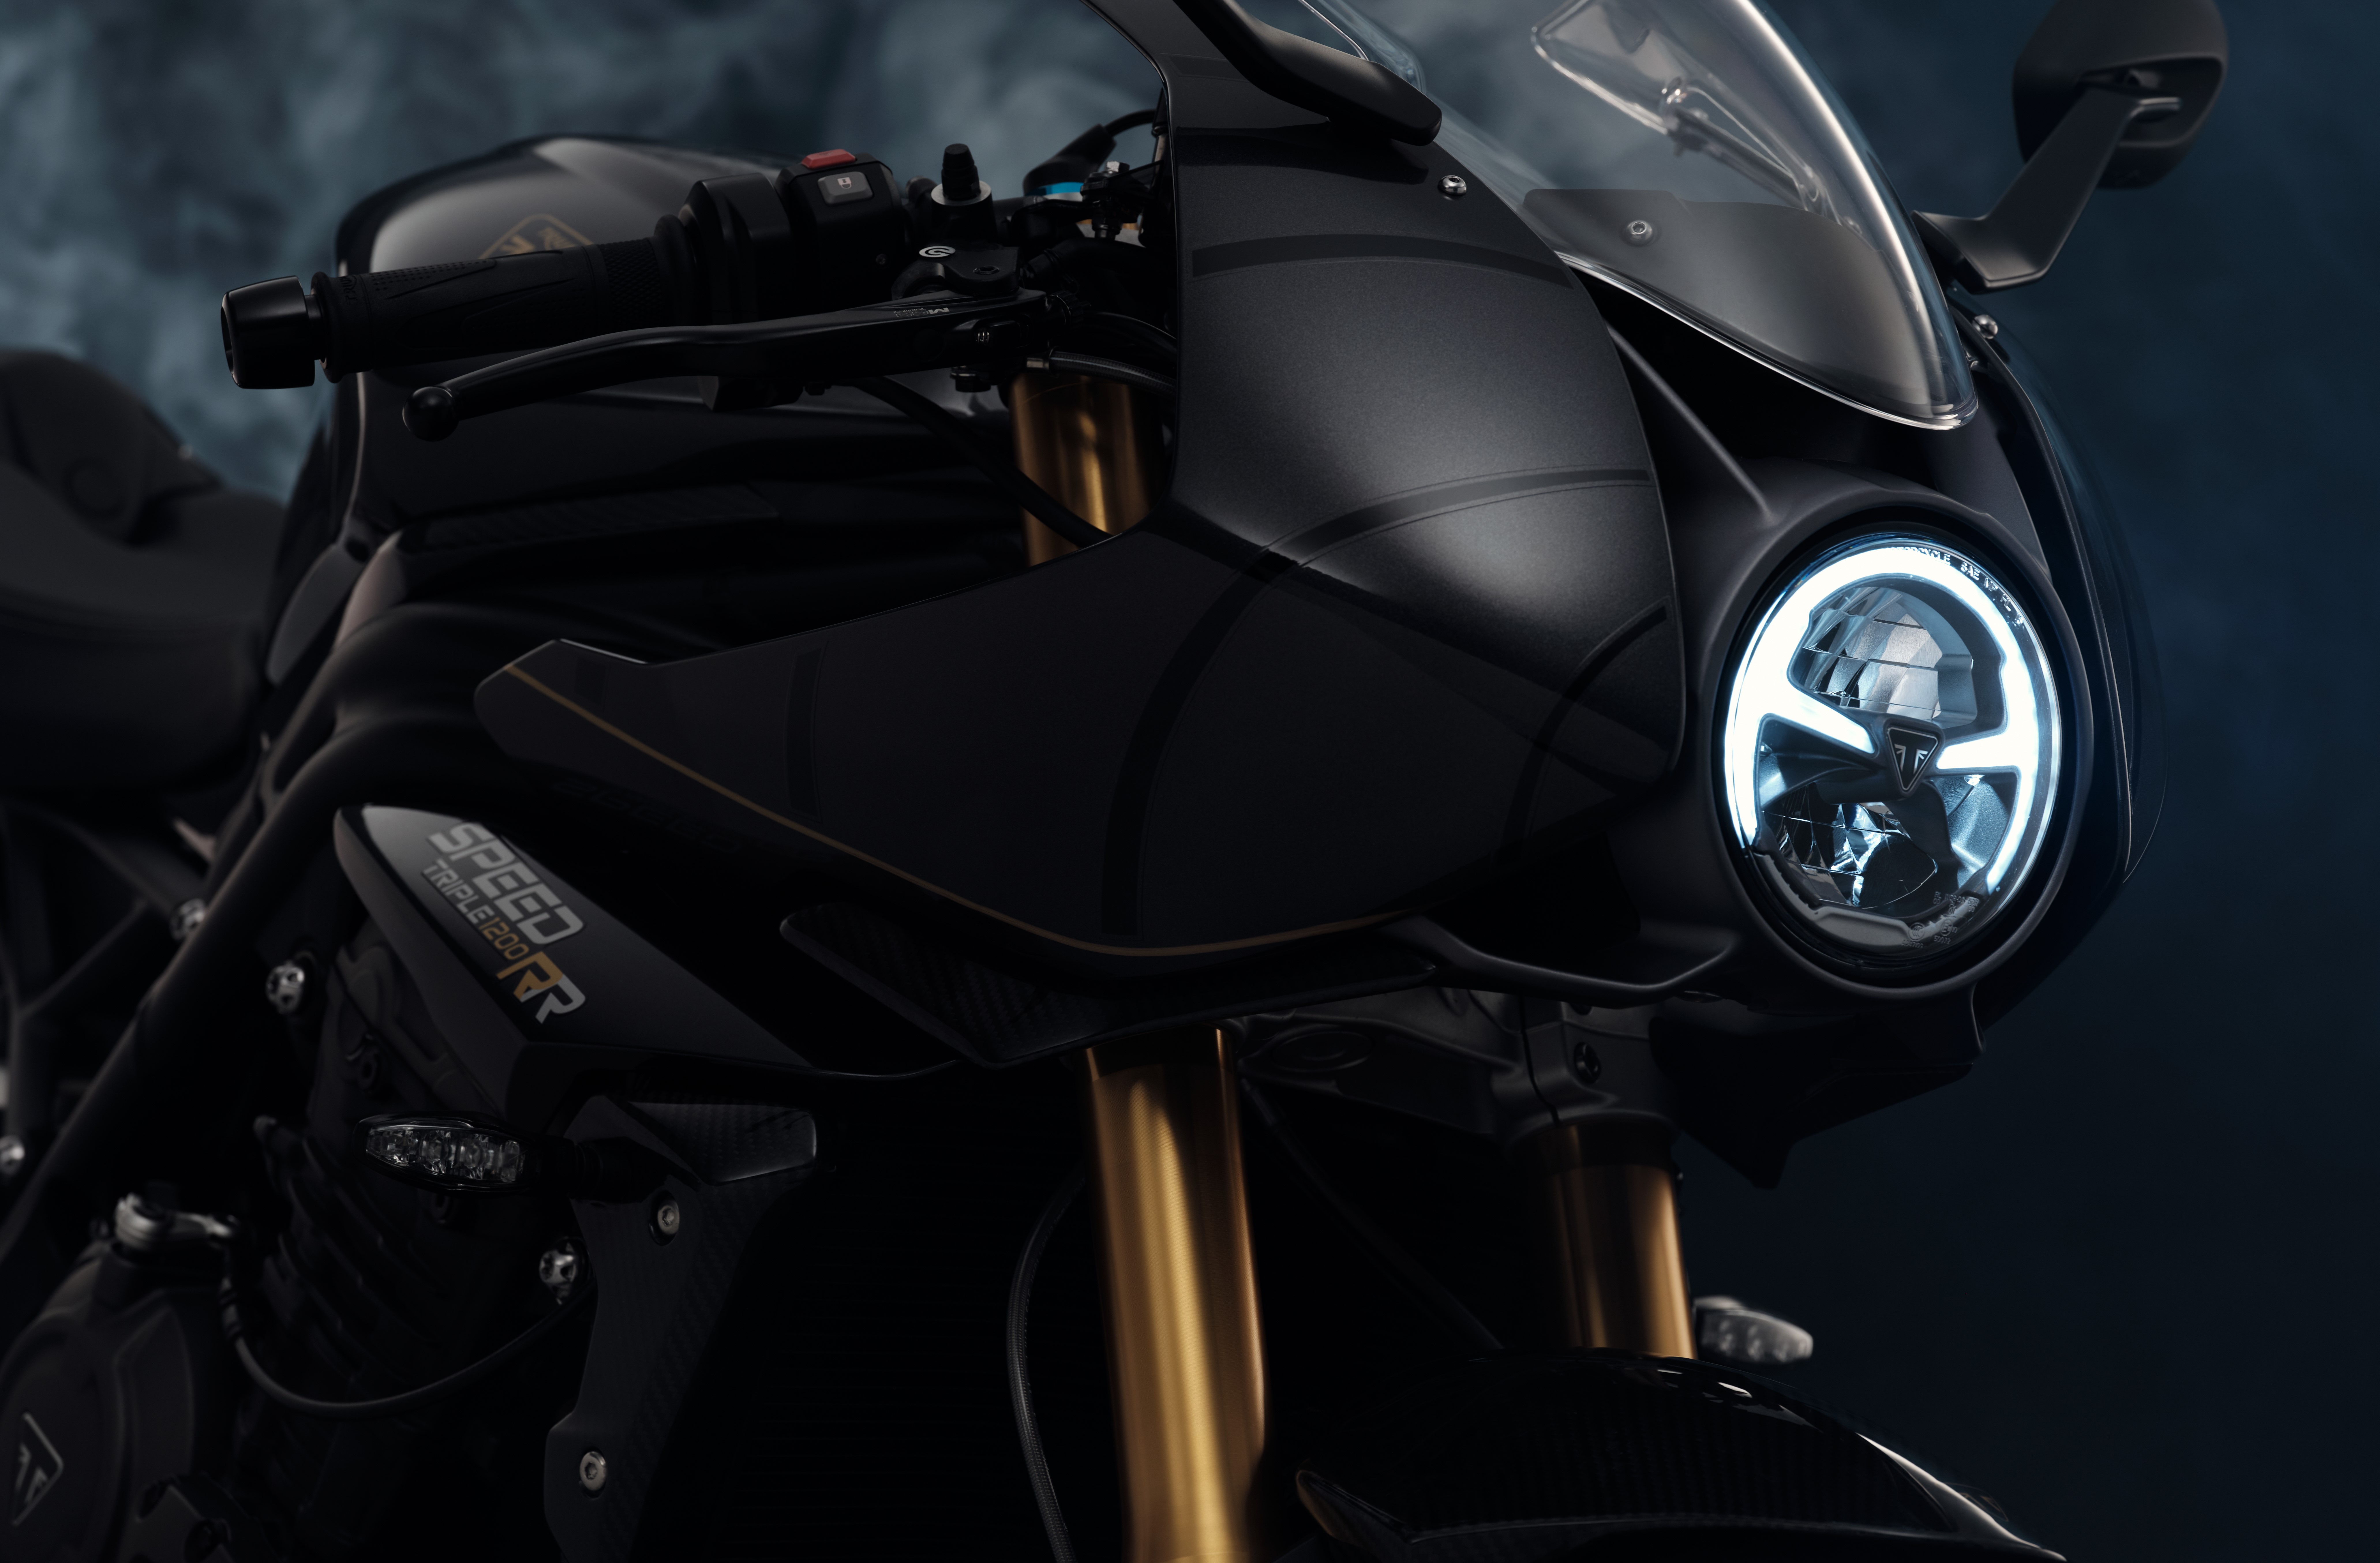 Triumph Speed Triple 1200 RR Bond Edition motorcycle showcased as a stylish HD desktop wallpaper with a focus on its sleek black design and distinctive headlight.